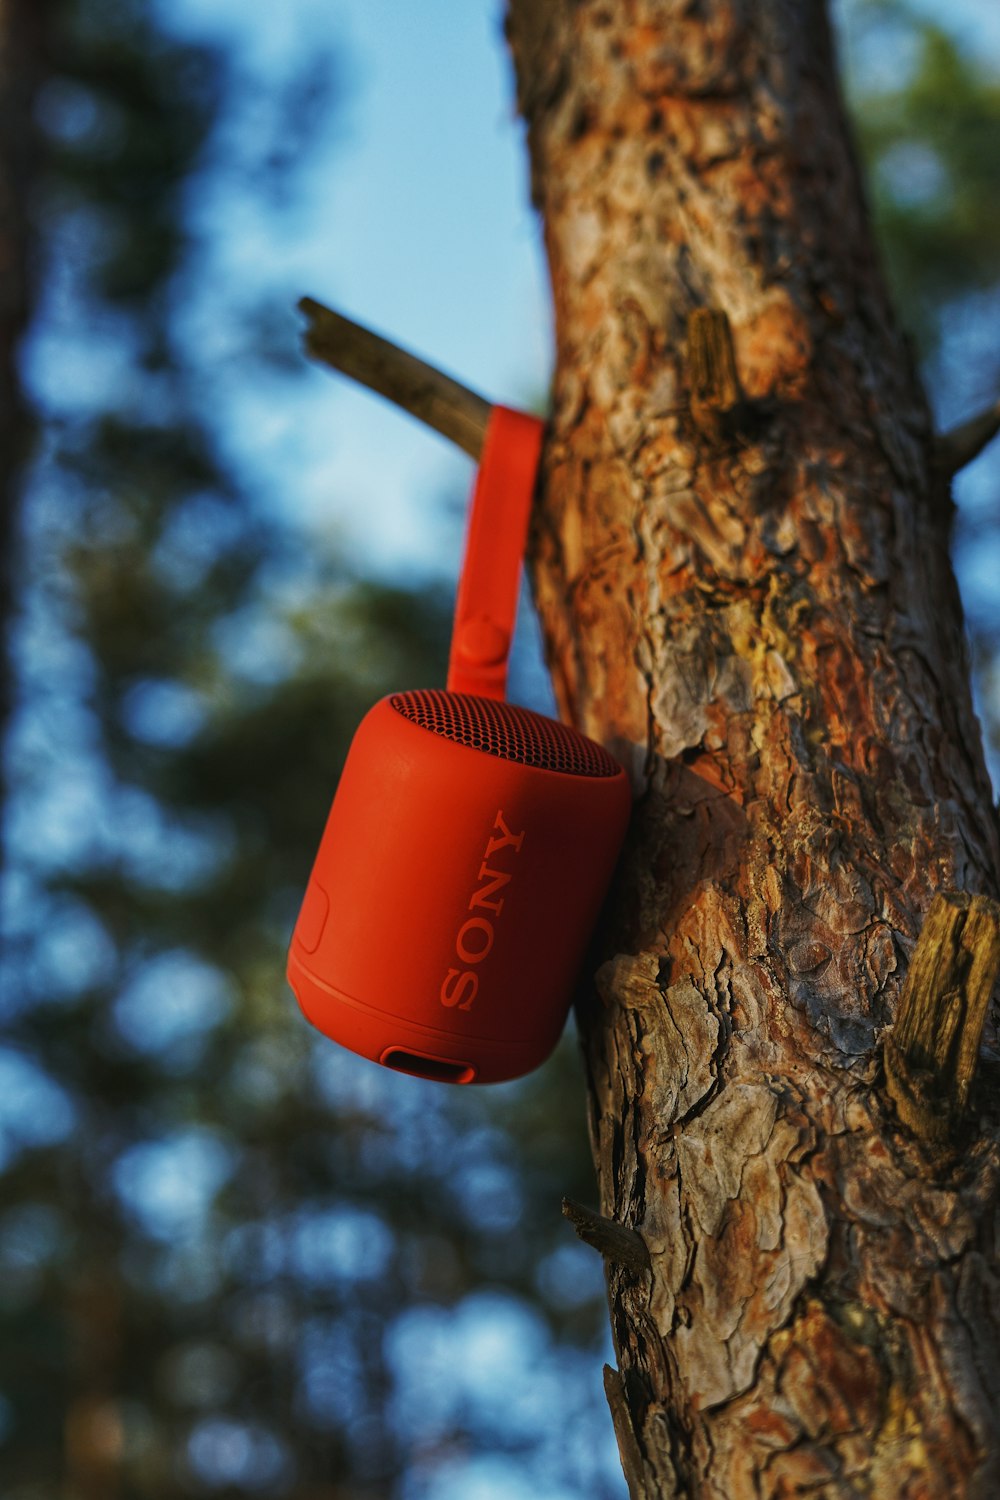 a red and white plastic cup on a tree